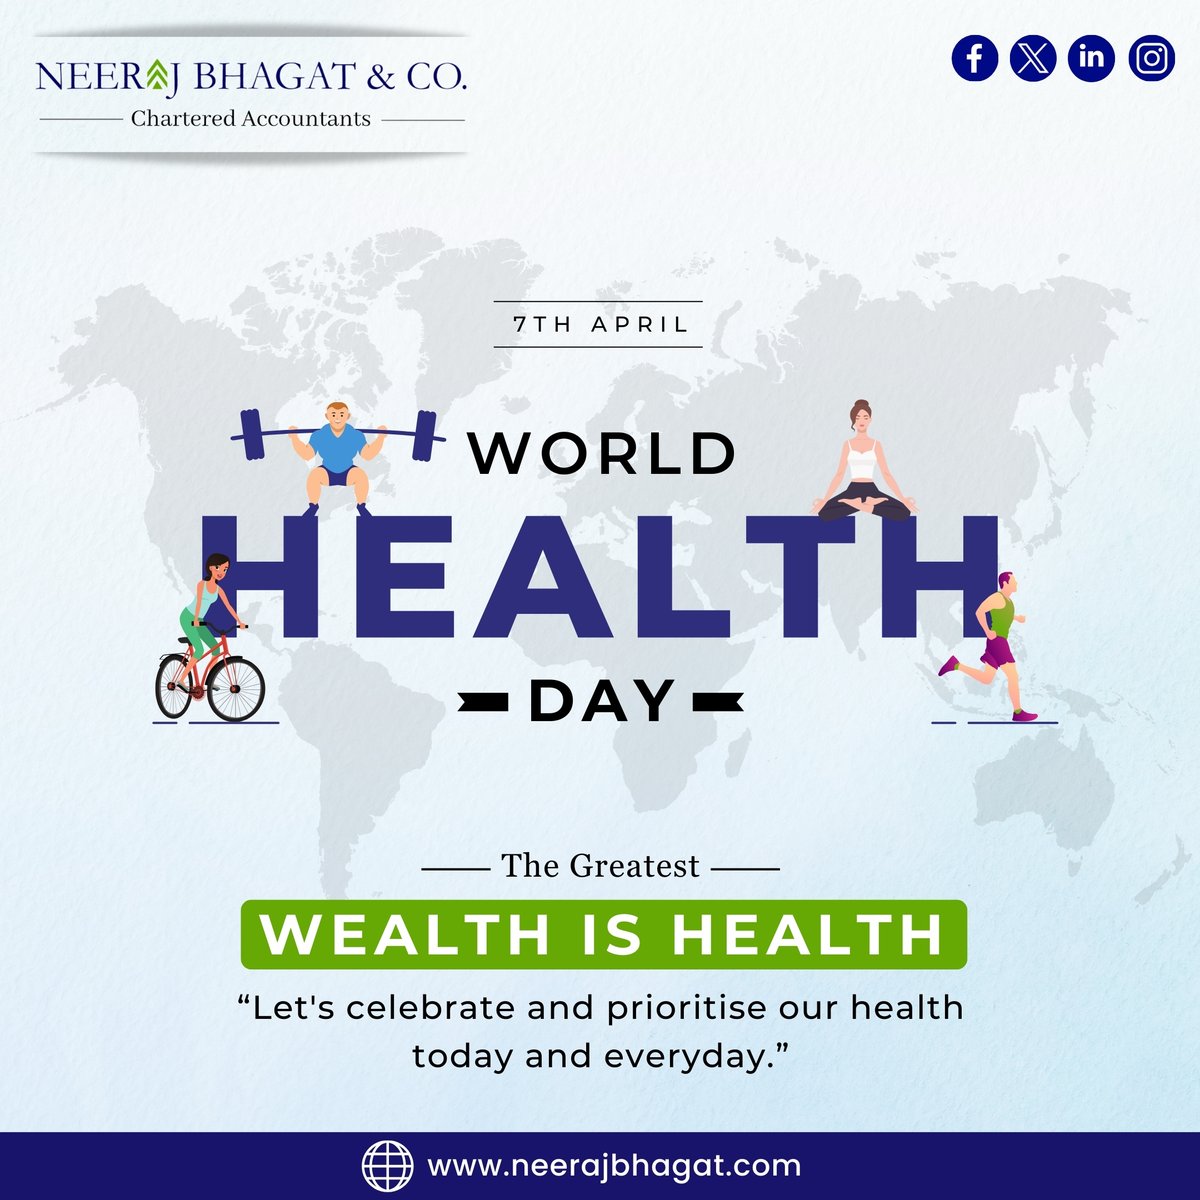 World Health Day 2024! 
Prioritizing health not only enriches lives but also fuels financial growth. On World Health Day, let's invest in well-being for a prosperous future 🌍🌱
.
.
.
#WorldHealthDay2024
#HealthForAll #GlobalHealth
#NBC #CA_RuchikaBhagat
#NeerajBhagat